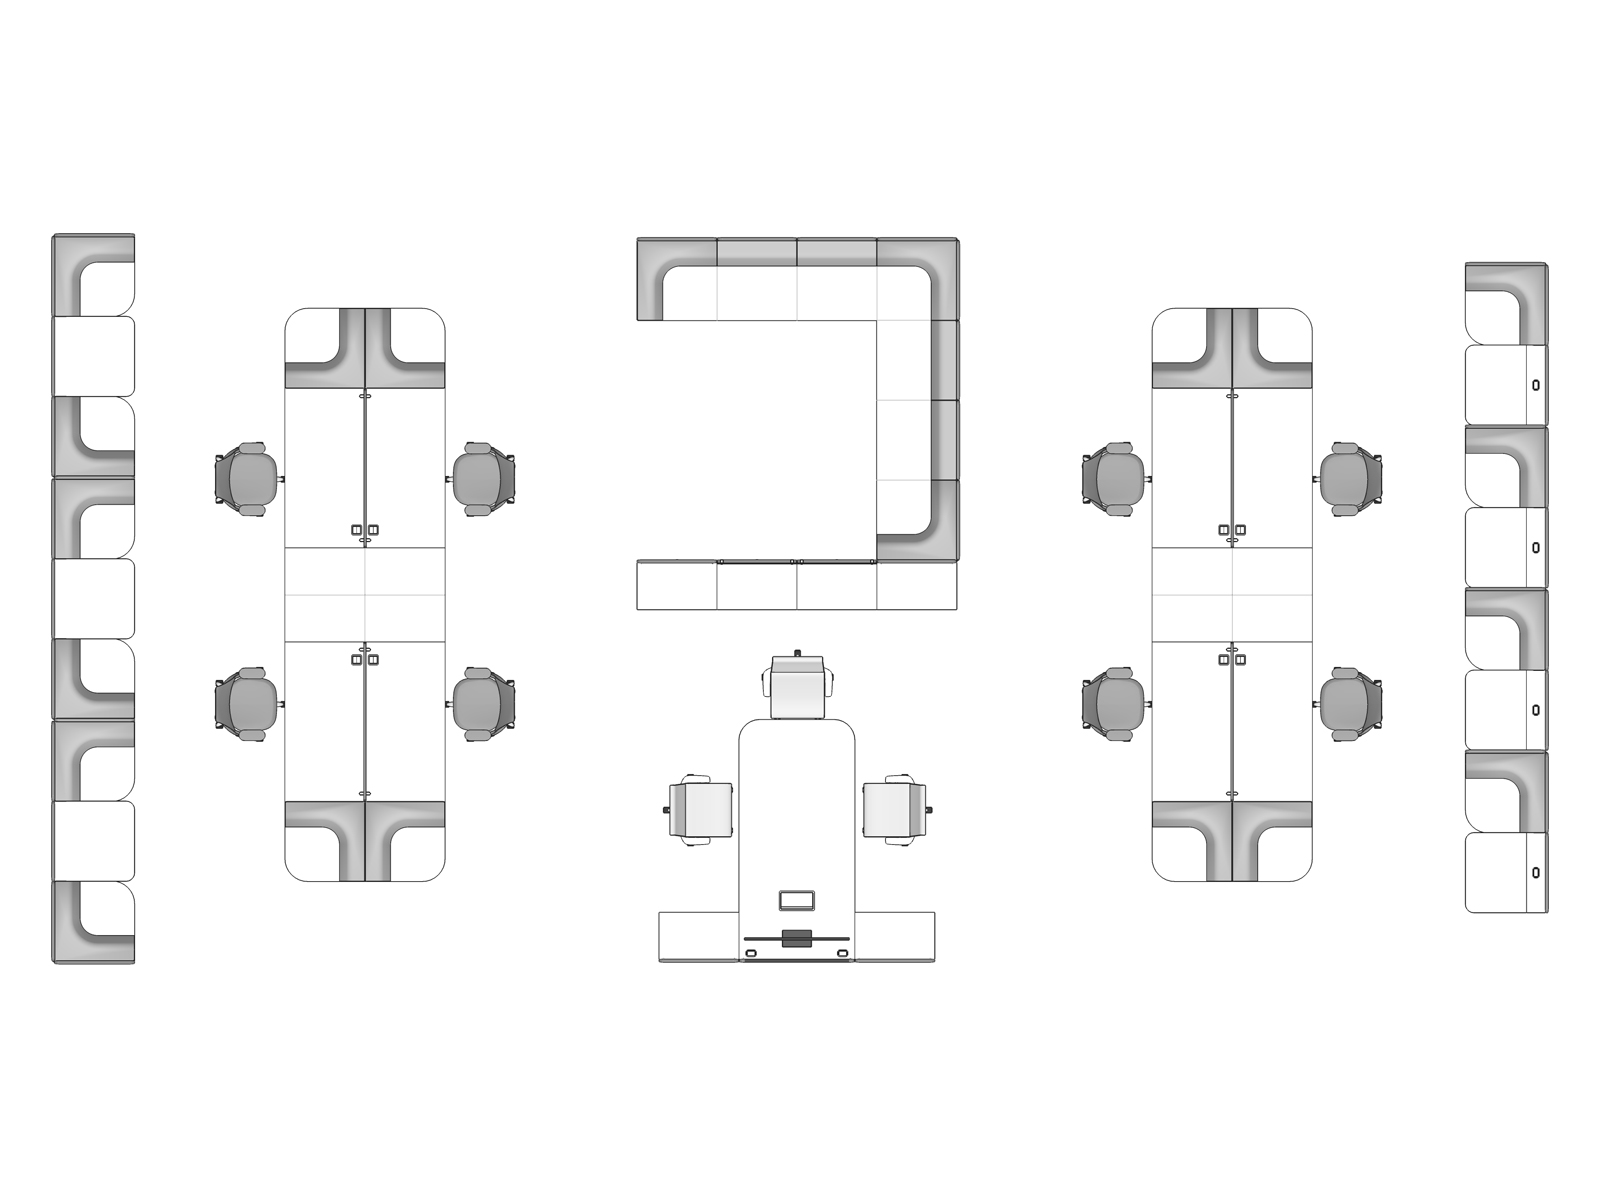 A line drawing viewed from above - Clubhouse 006